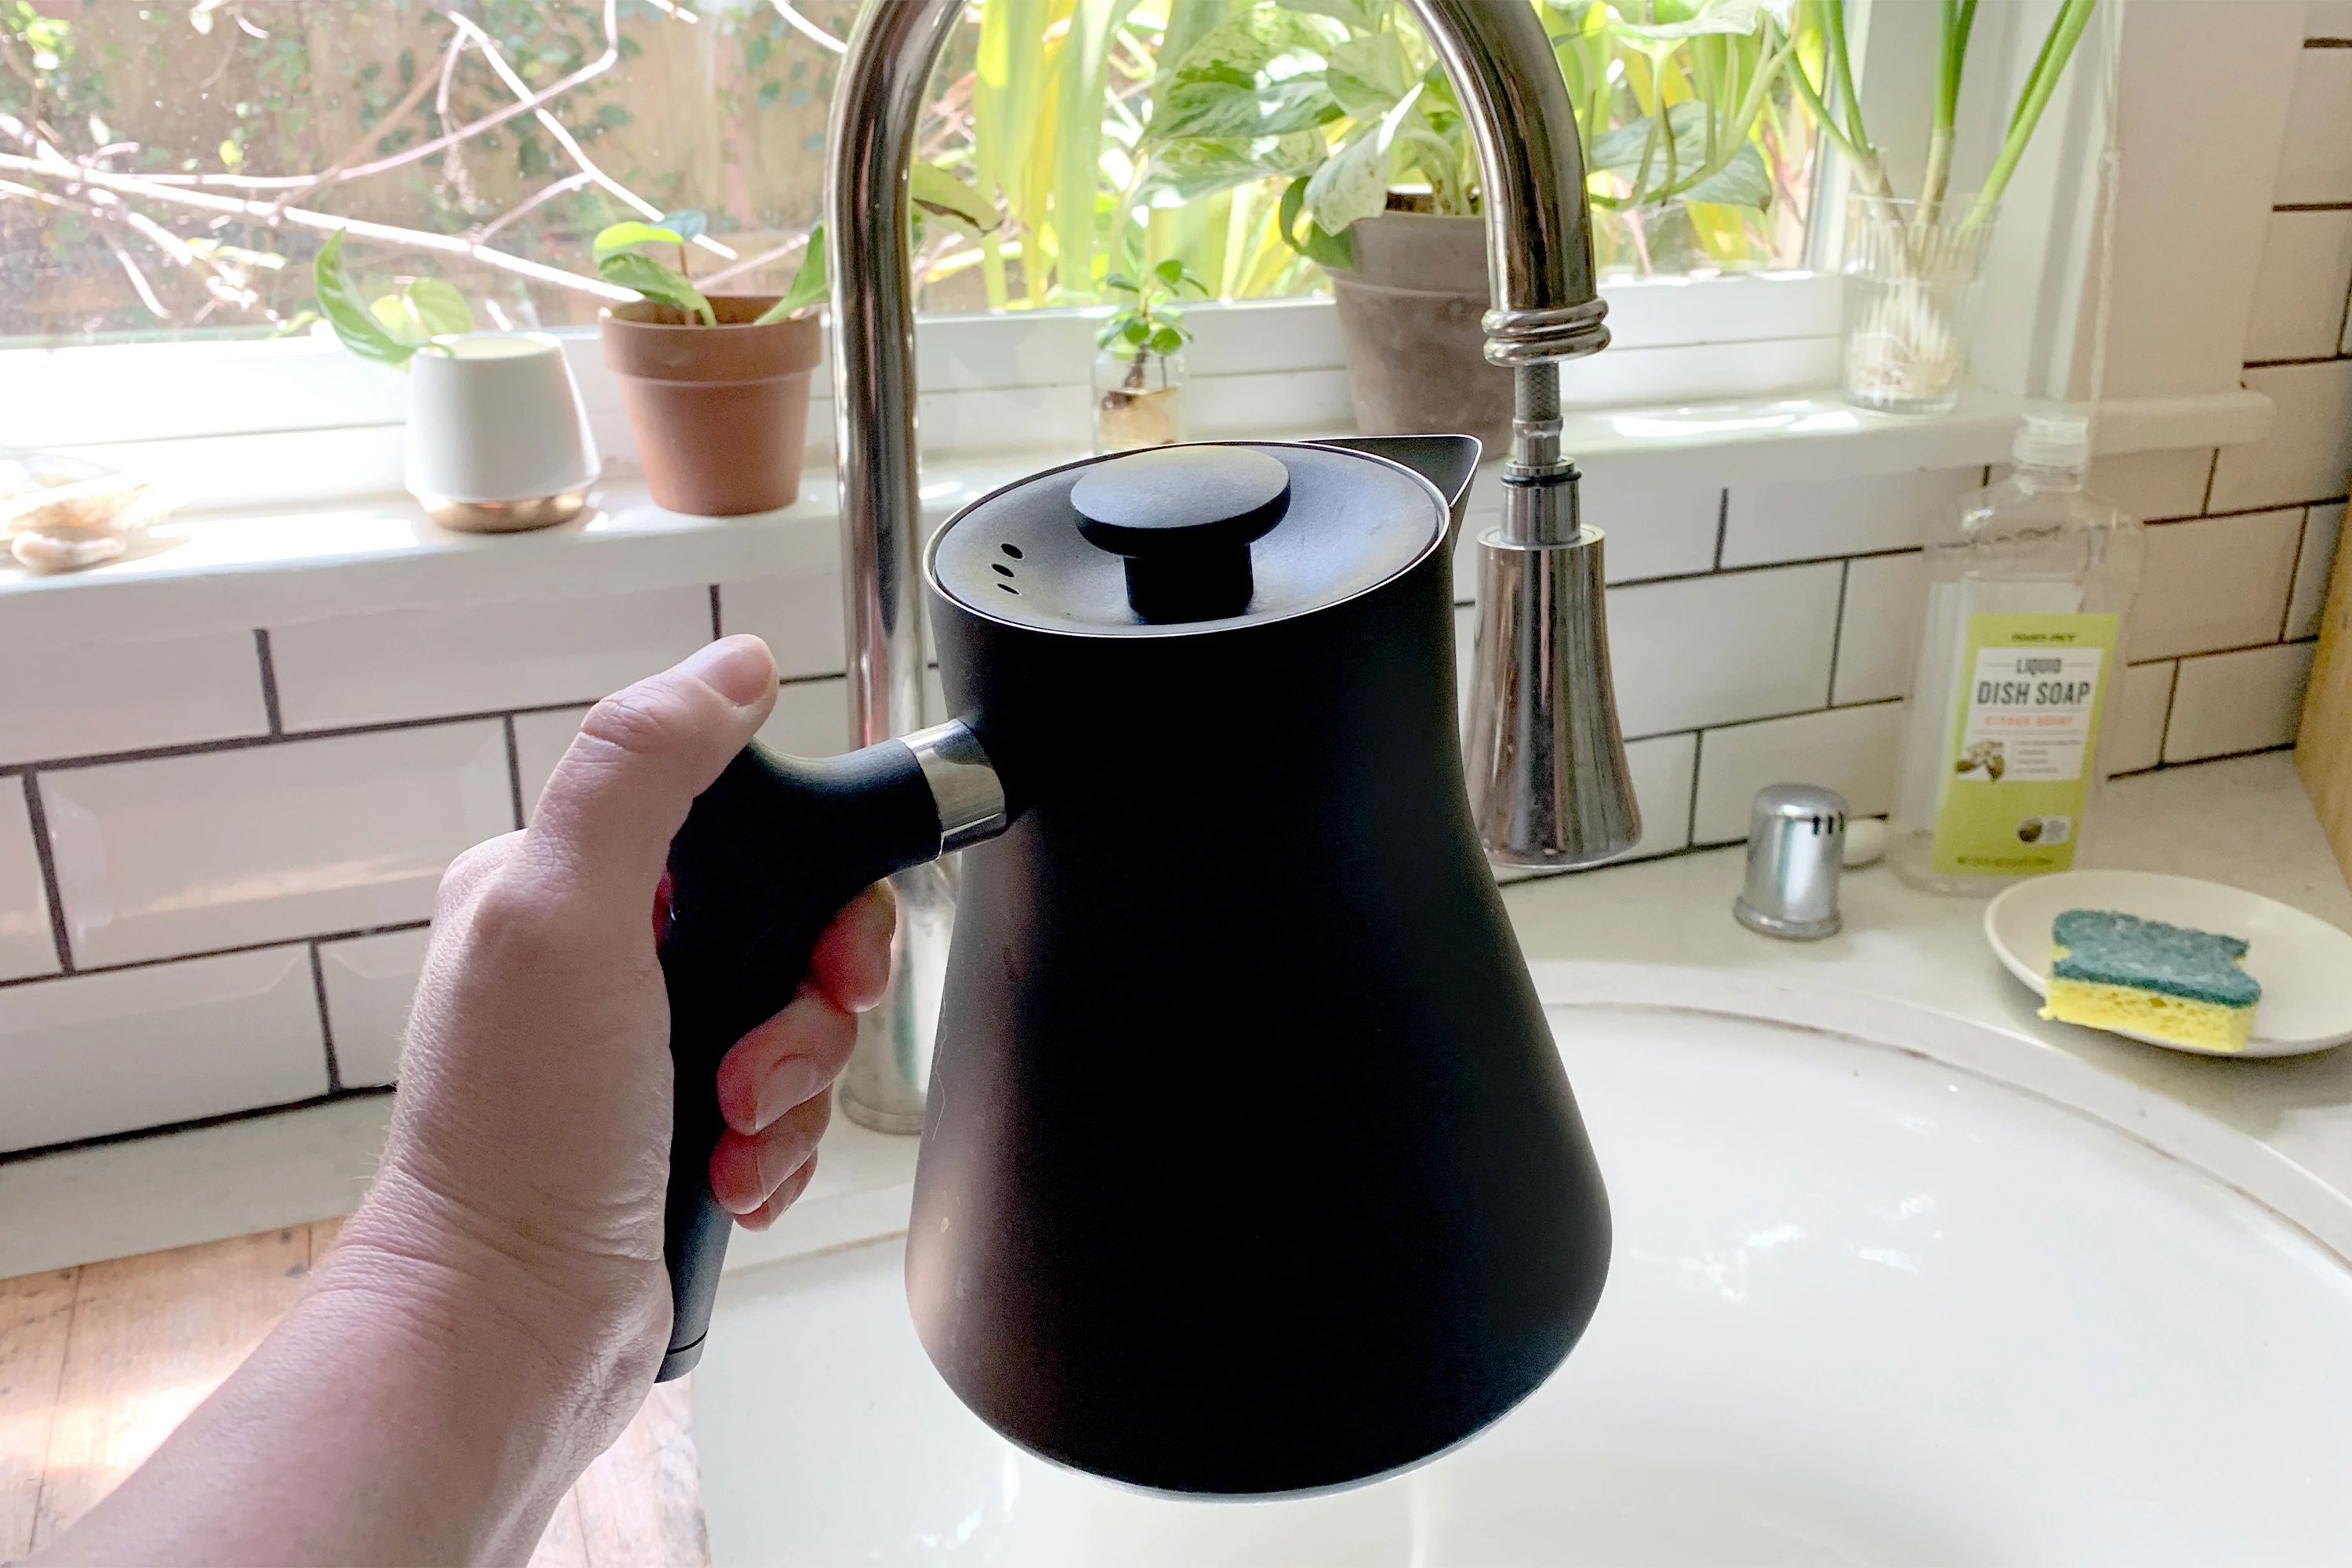 https://hips.hearstapps.com/hmg-prod.s3.amazonaws.com/images/how-to-clean-an-electric-kettle-lead-1672855027.jpg